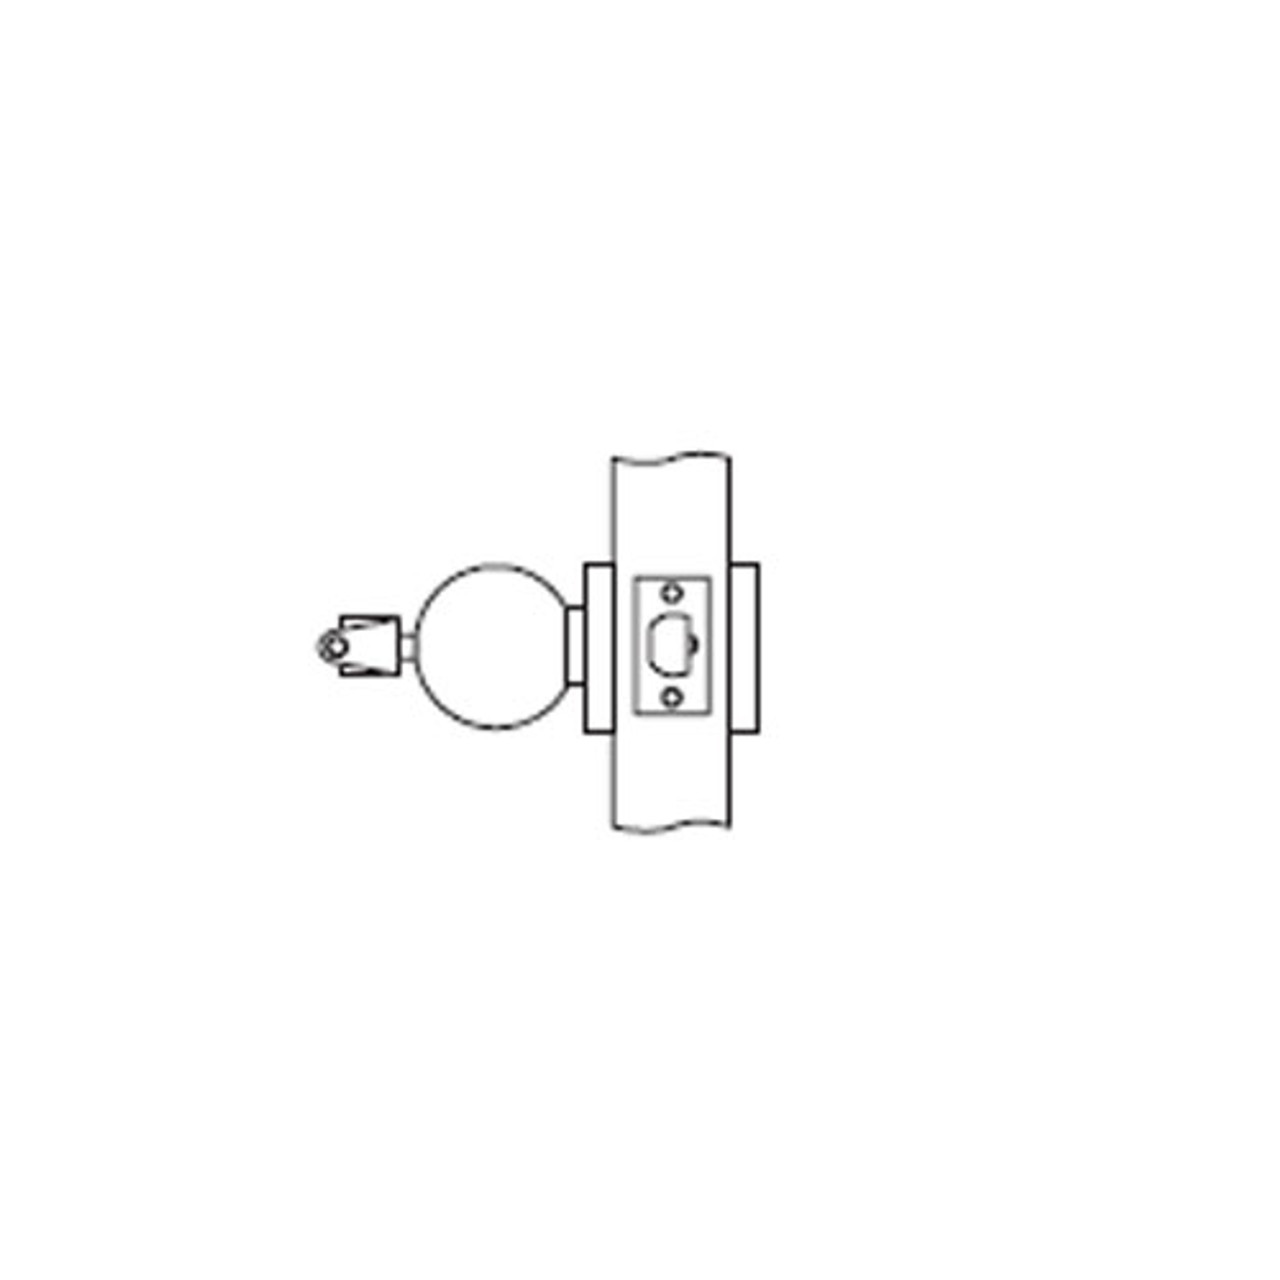 MK18-BD-10 Arrow Lock MK Series Cylindrical Locksets Single Cylinder for Communicating Classroom with BD Knob in Satin Bronze